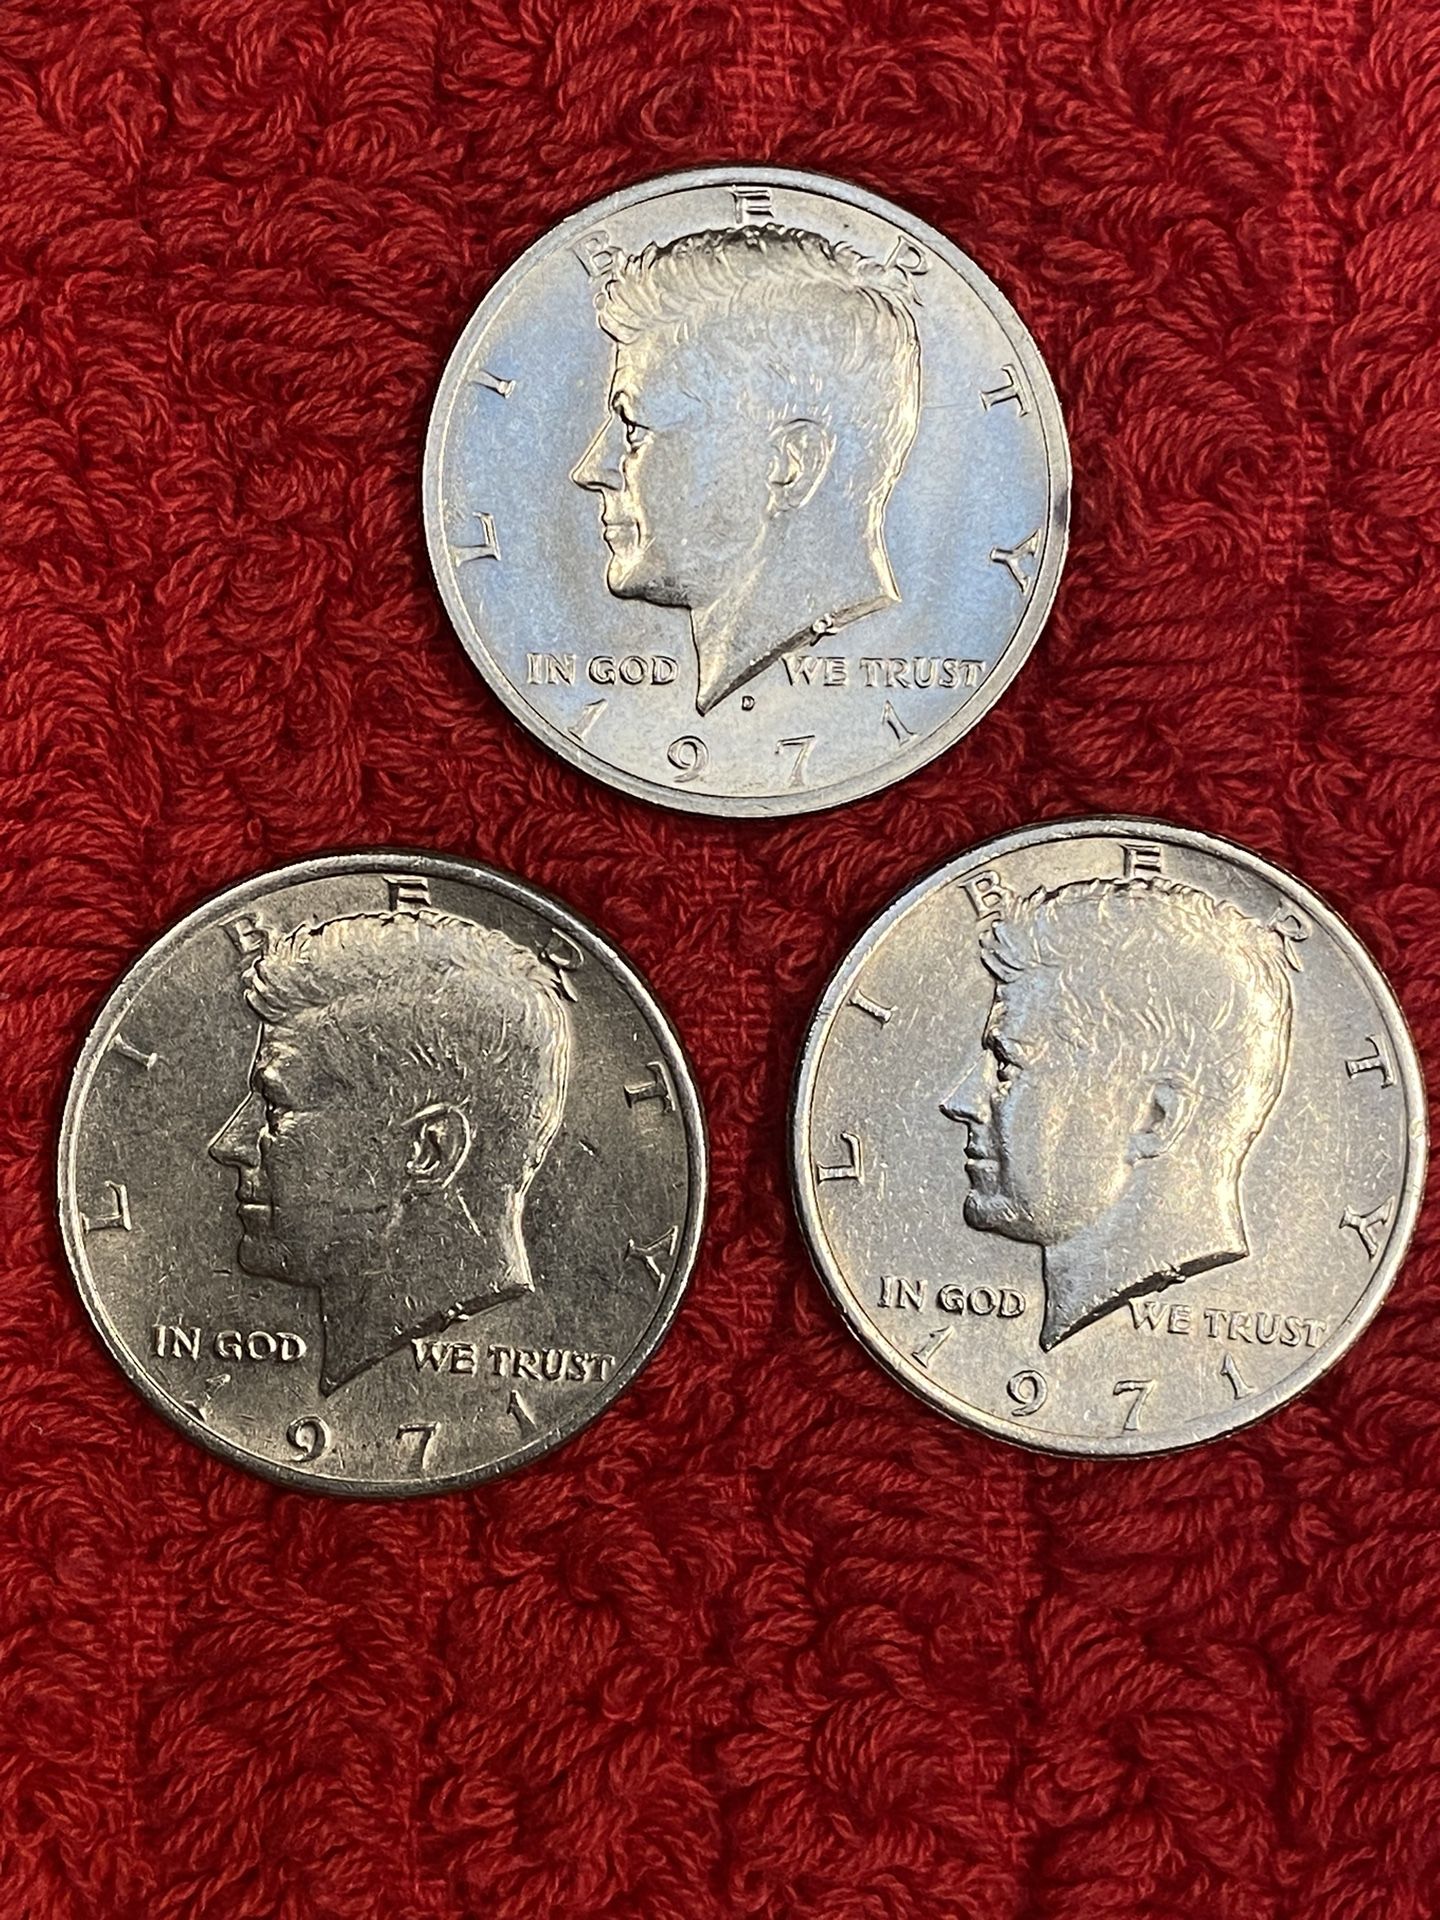 1971 Half Dollar Coins  ( More Coins Posted Taking Offers )